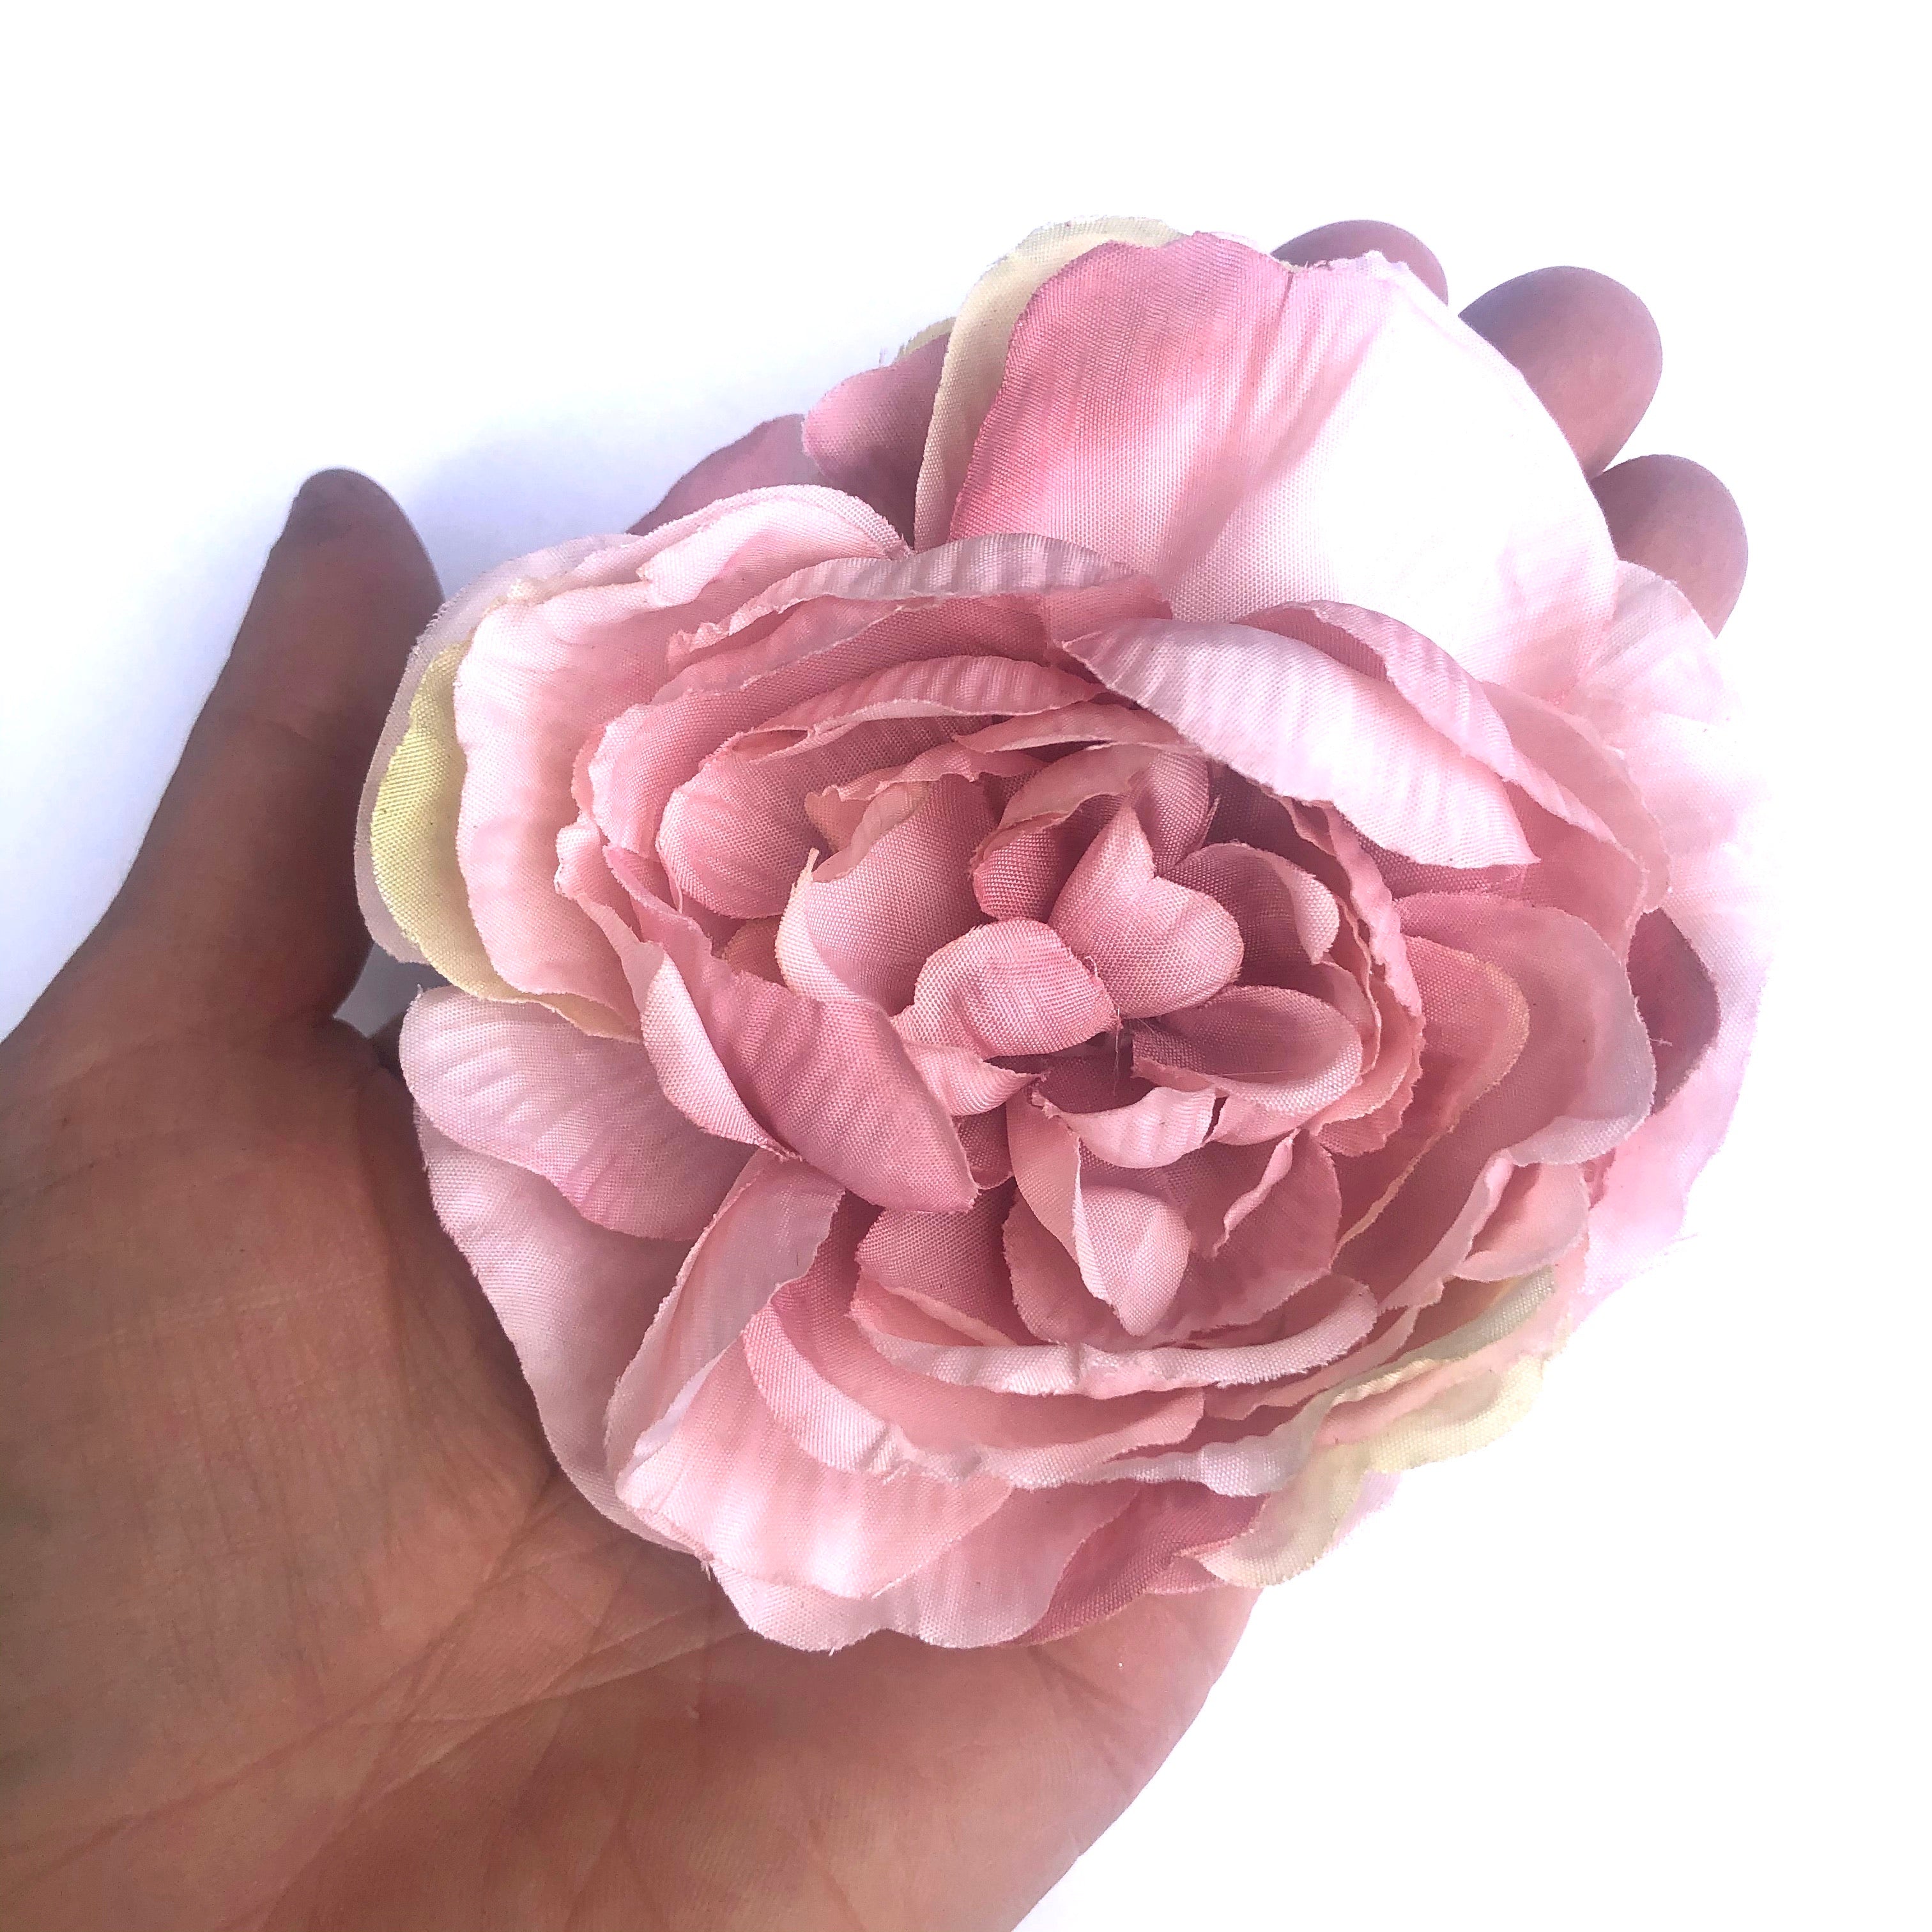 Artificial Silk Flower Head - Pink Rose Style 7 - 1pc